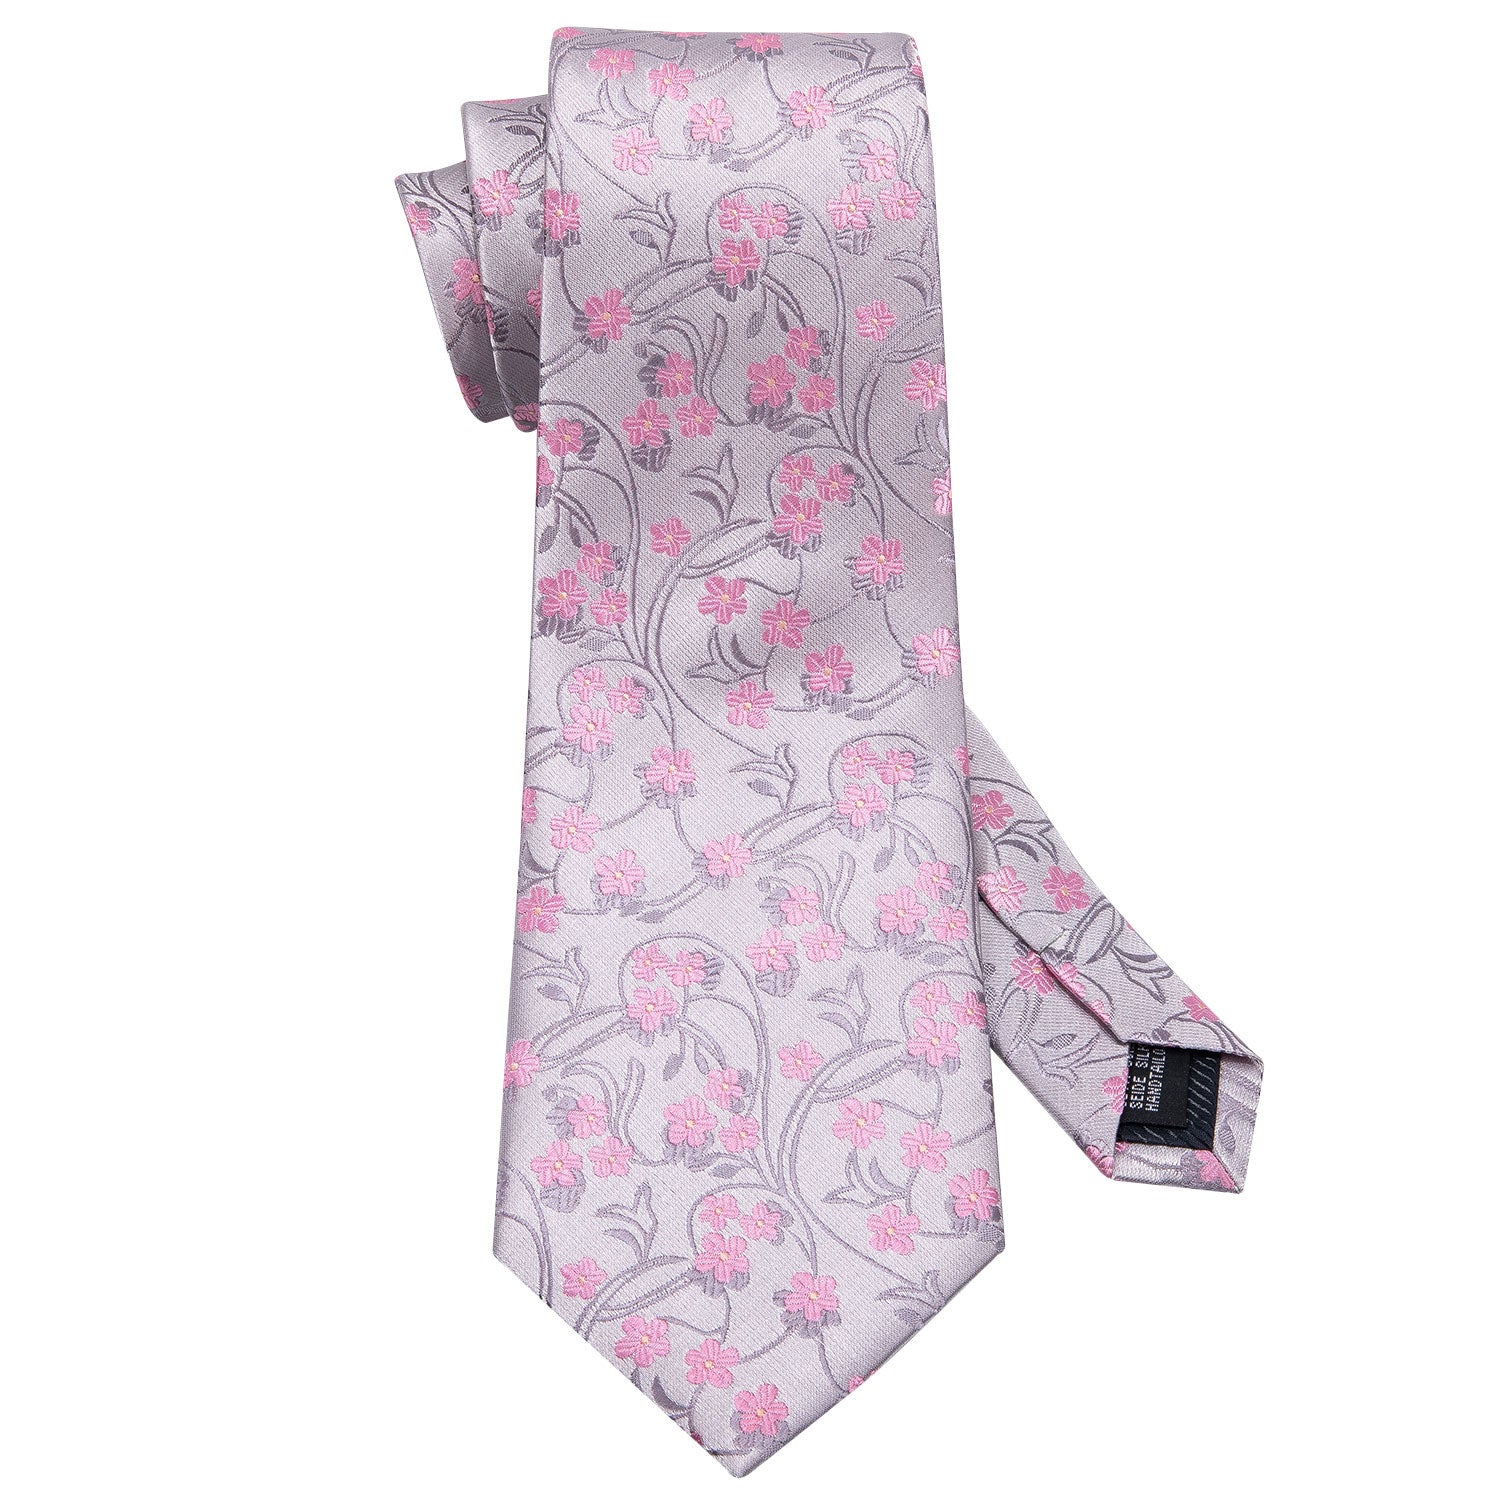 Barry.wang Pink Tie Silver Floral Tie Pocket Square Cufflinks Set